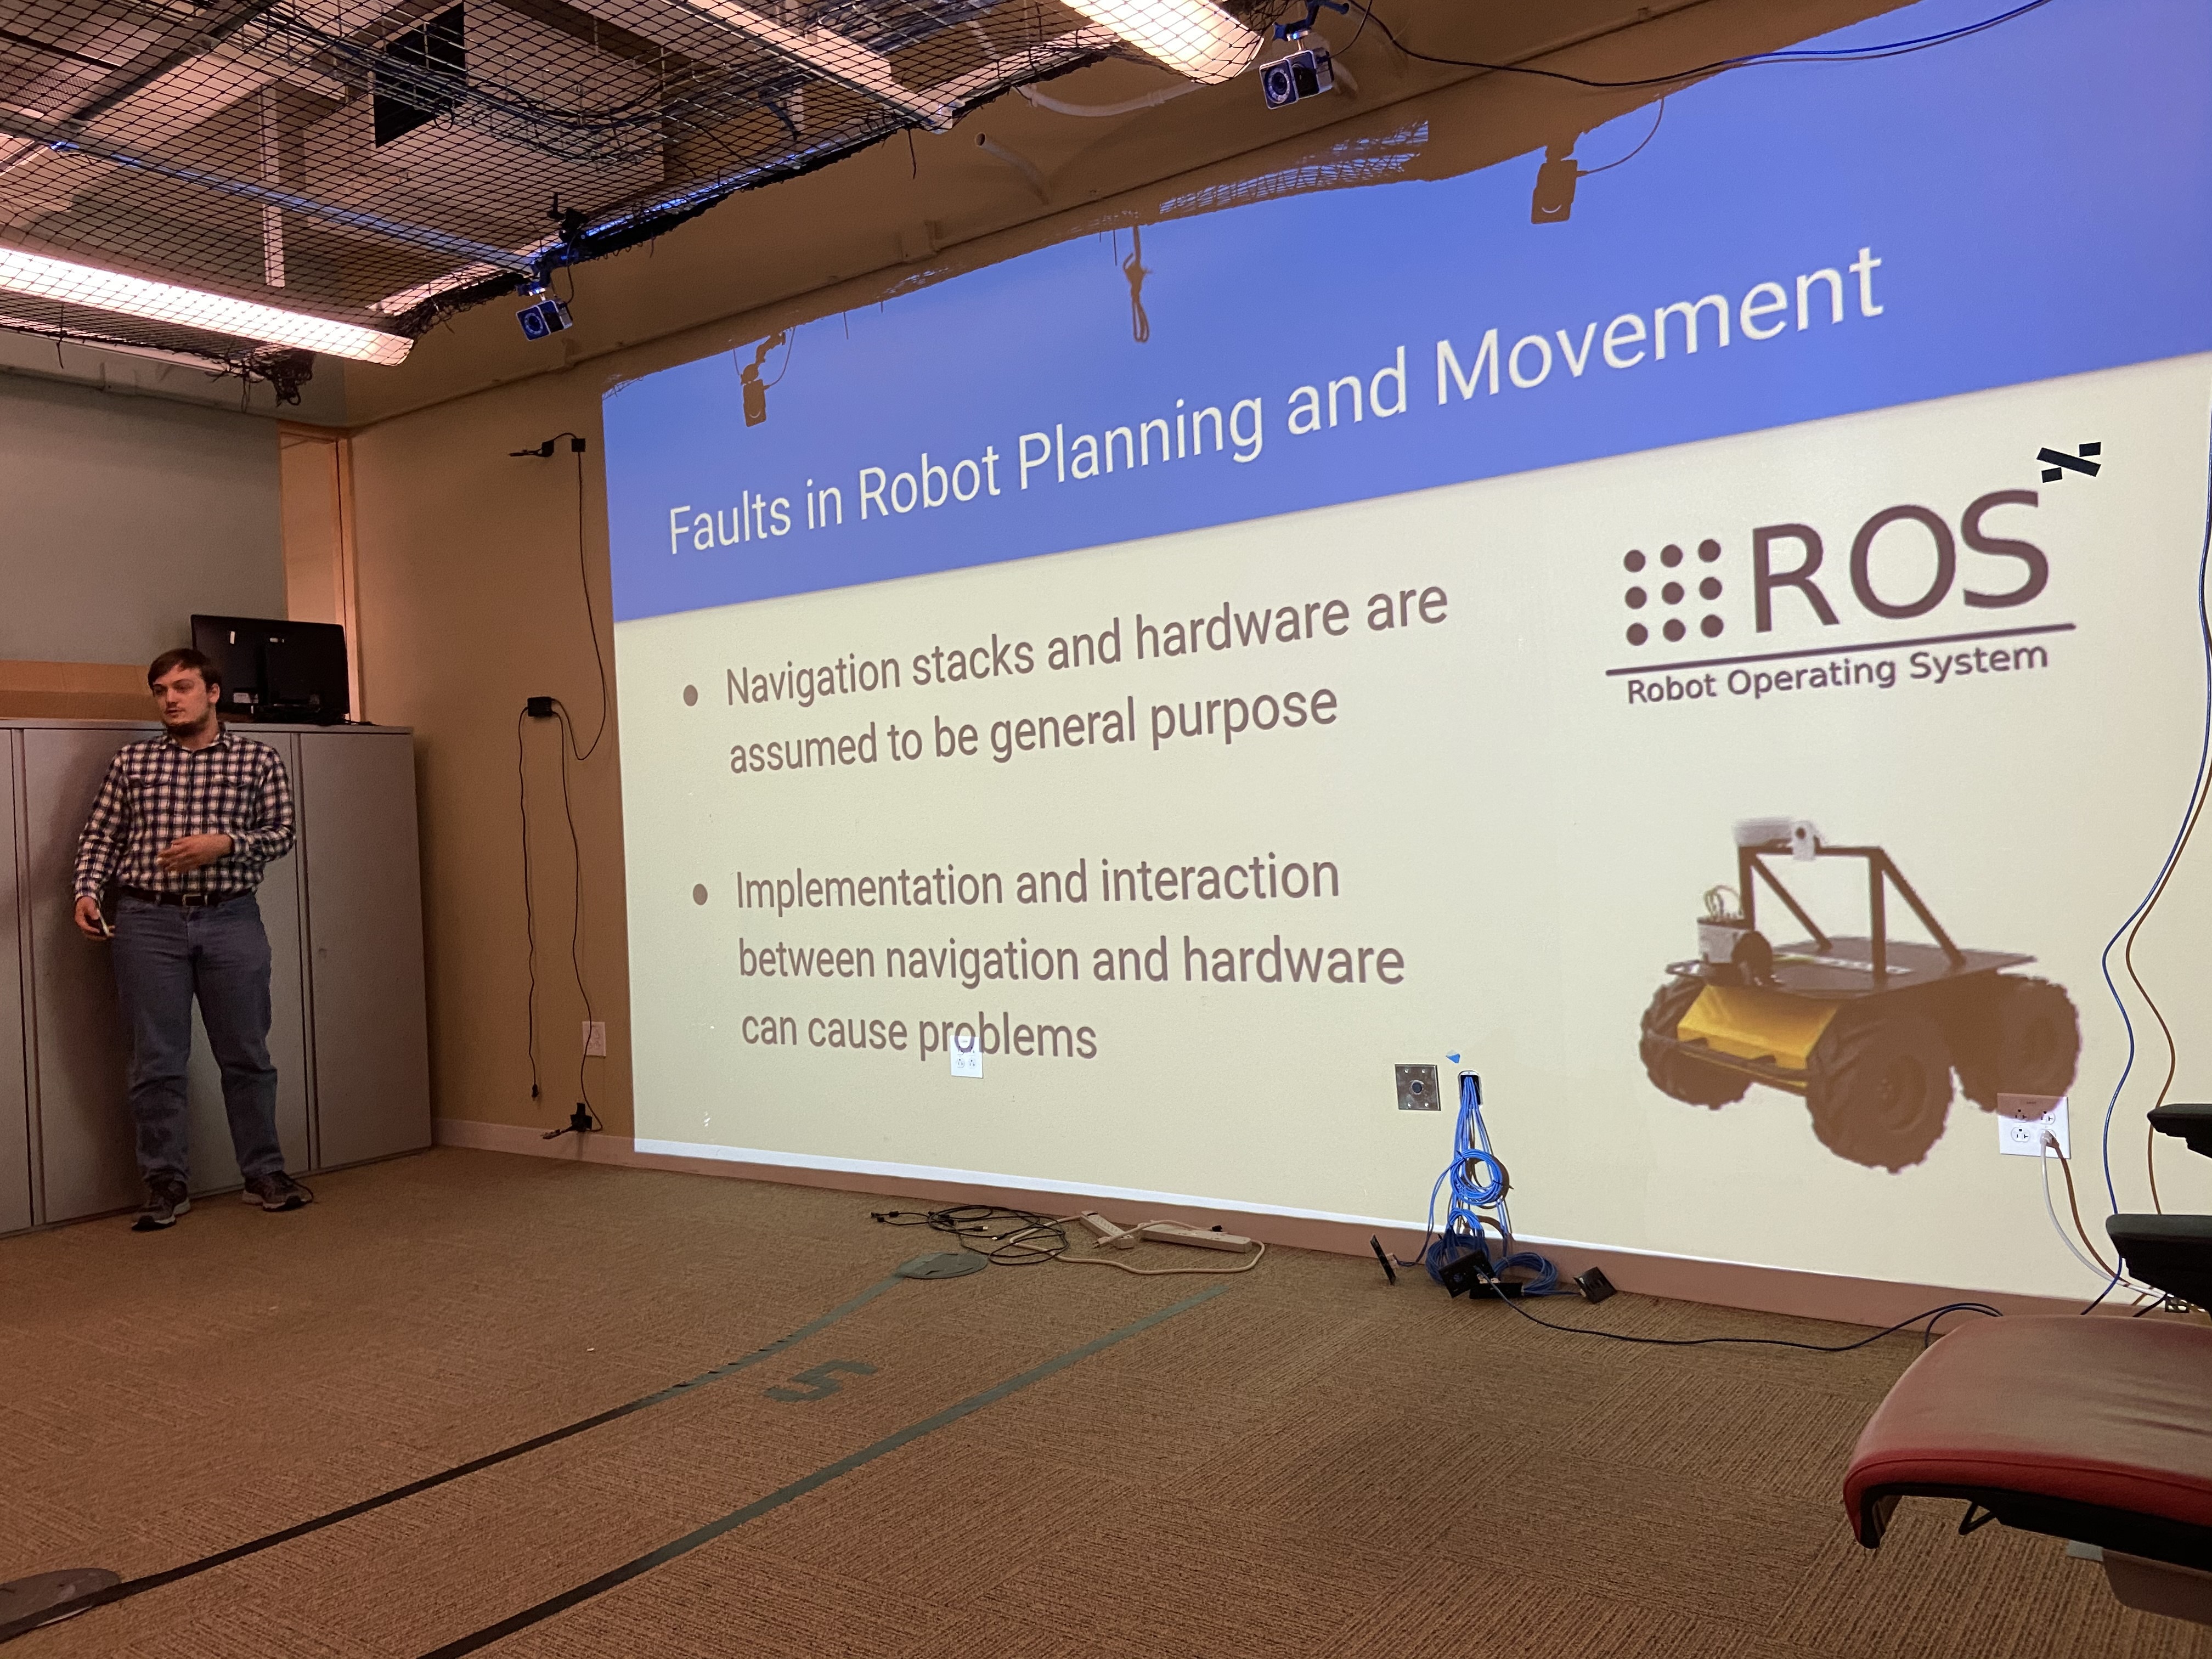 Trey talking about his current work on identifying and predicting faults in robots.